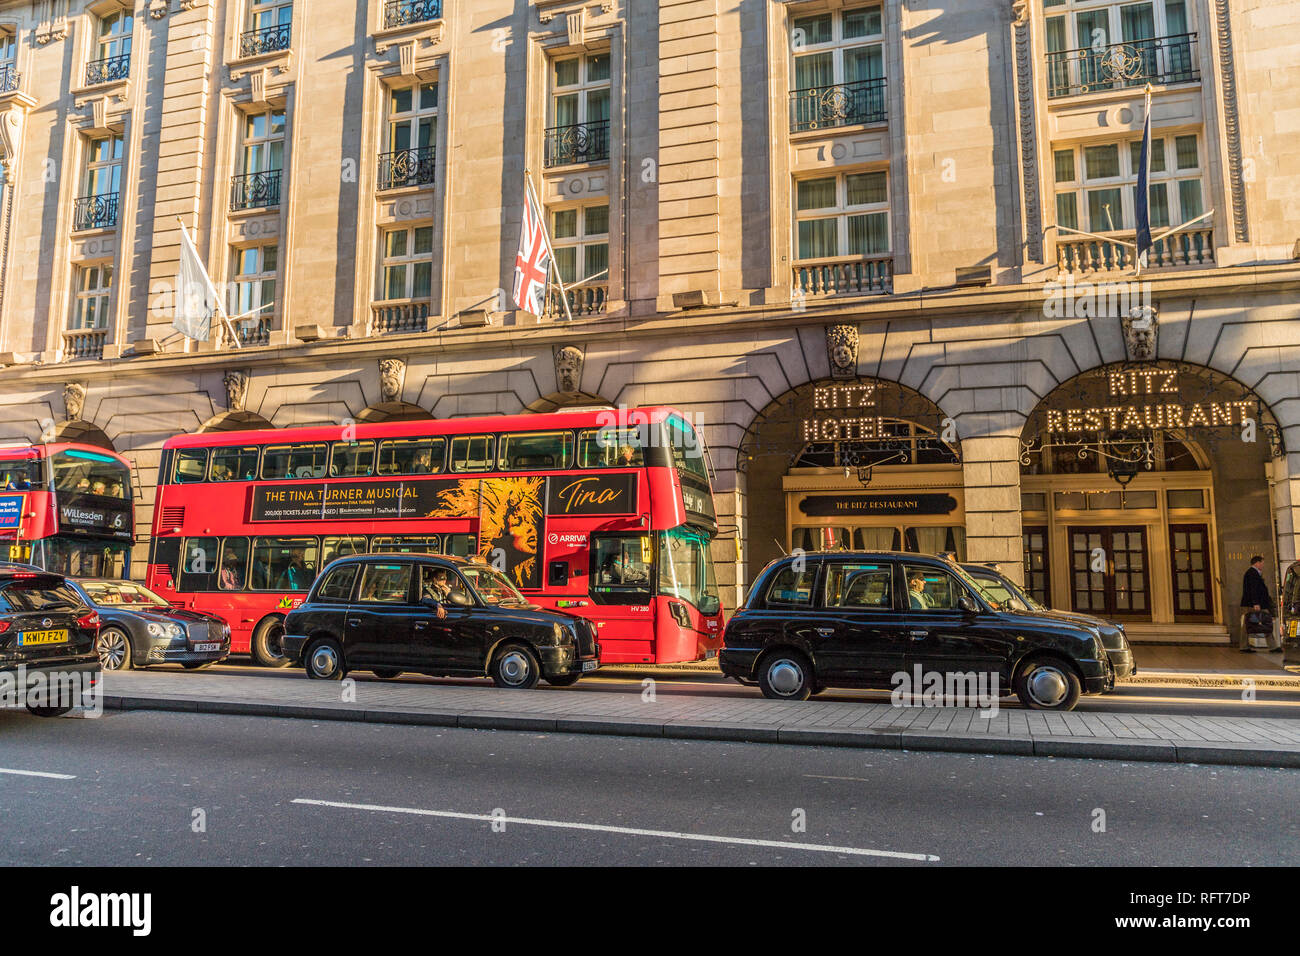 The Ritz Hotel in Piccadilly, London, England, United Kingdom, Europe Stock Photo